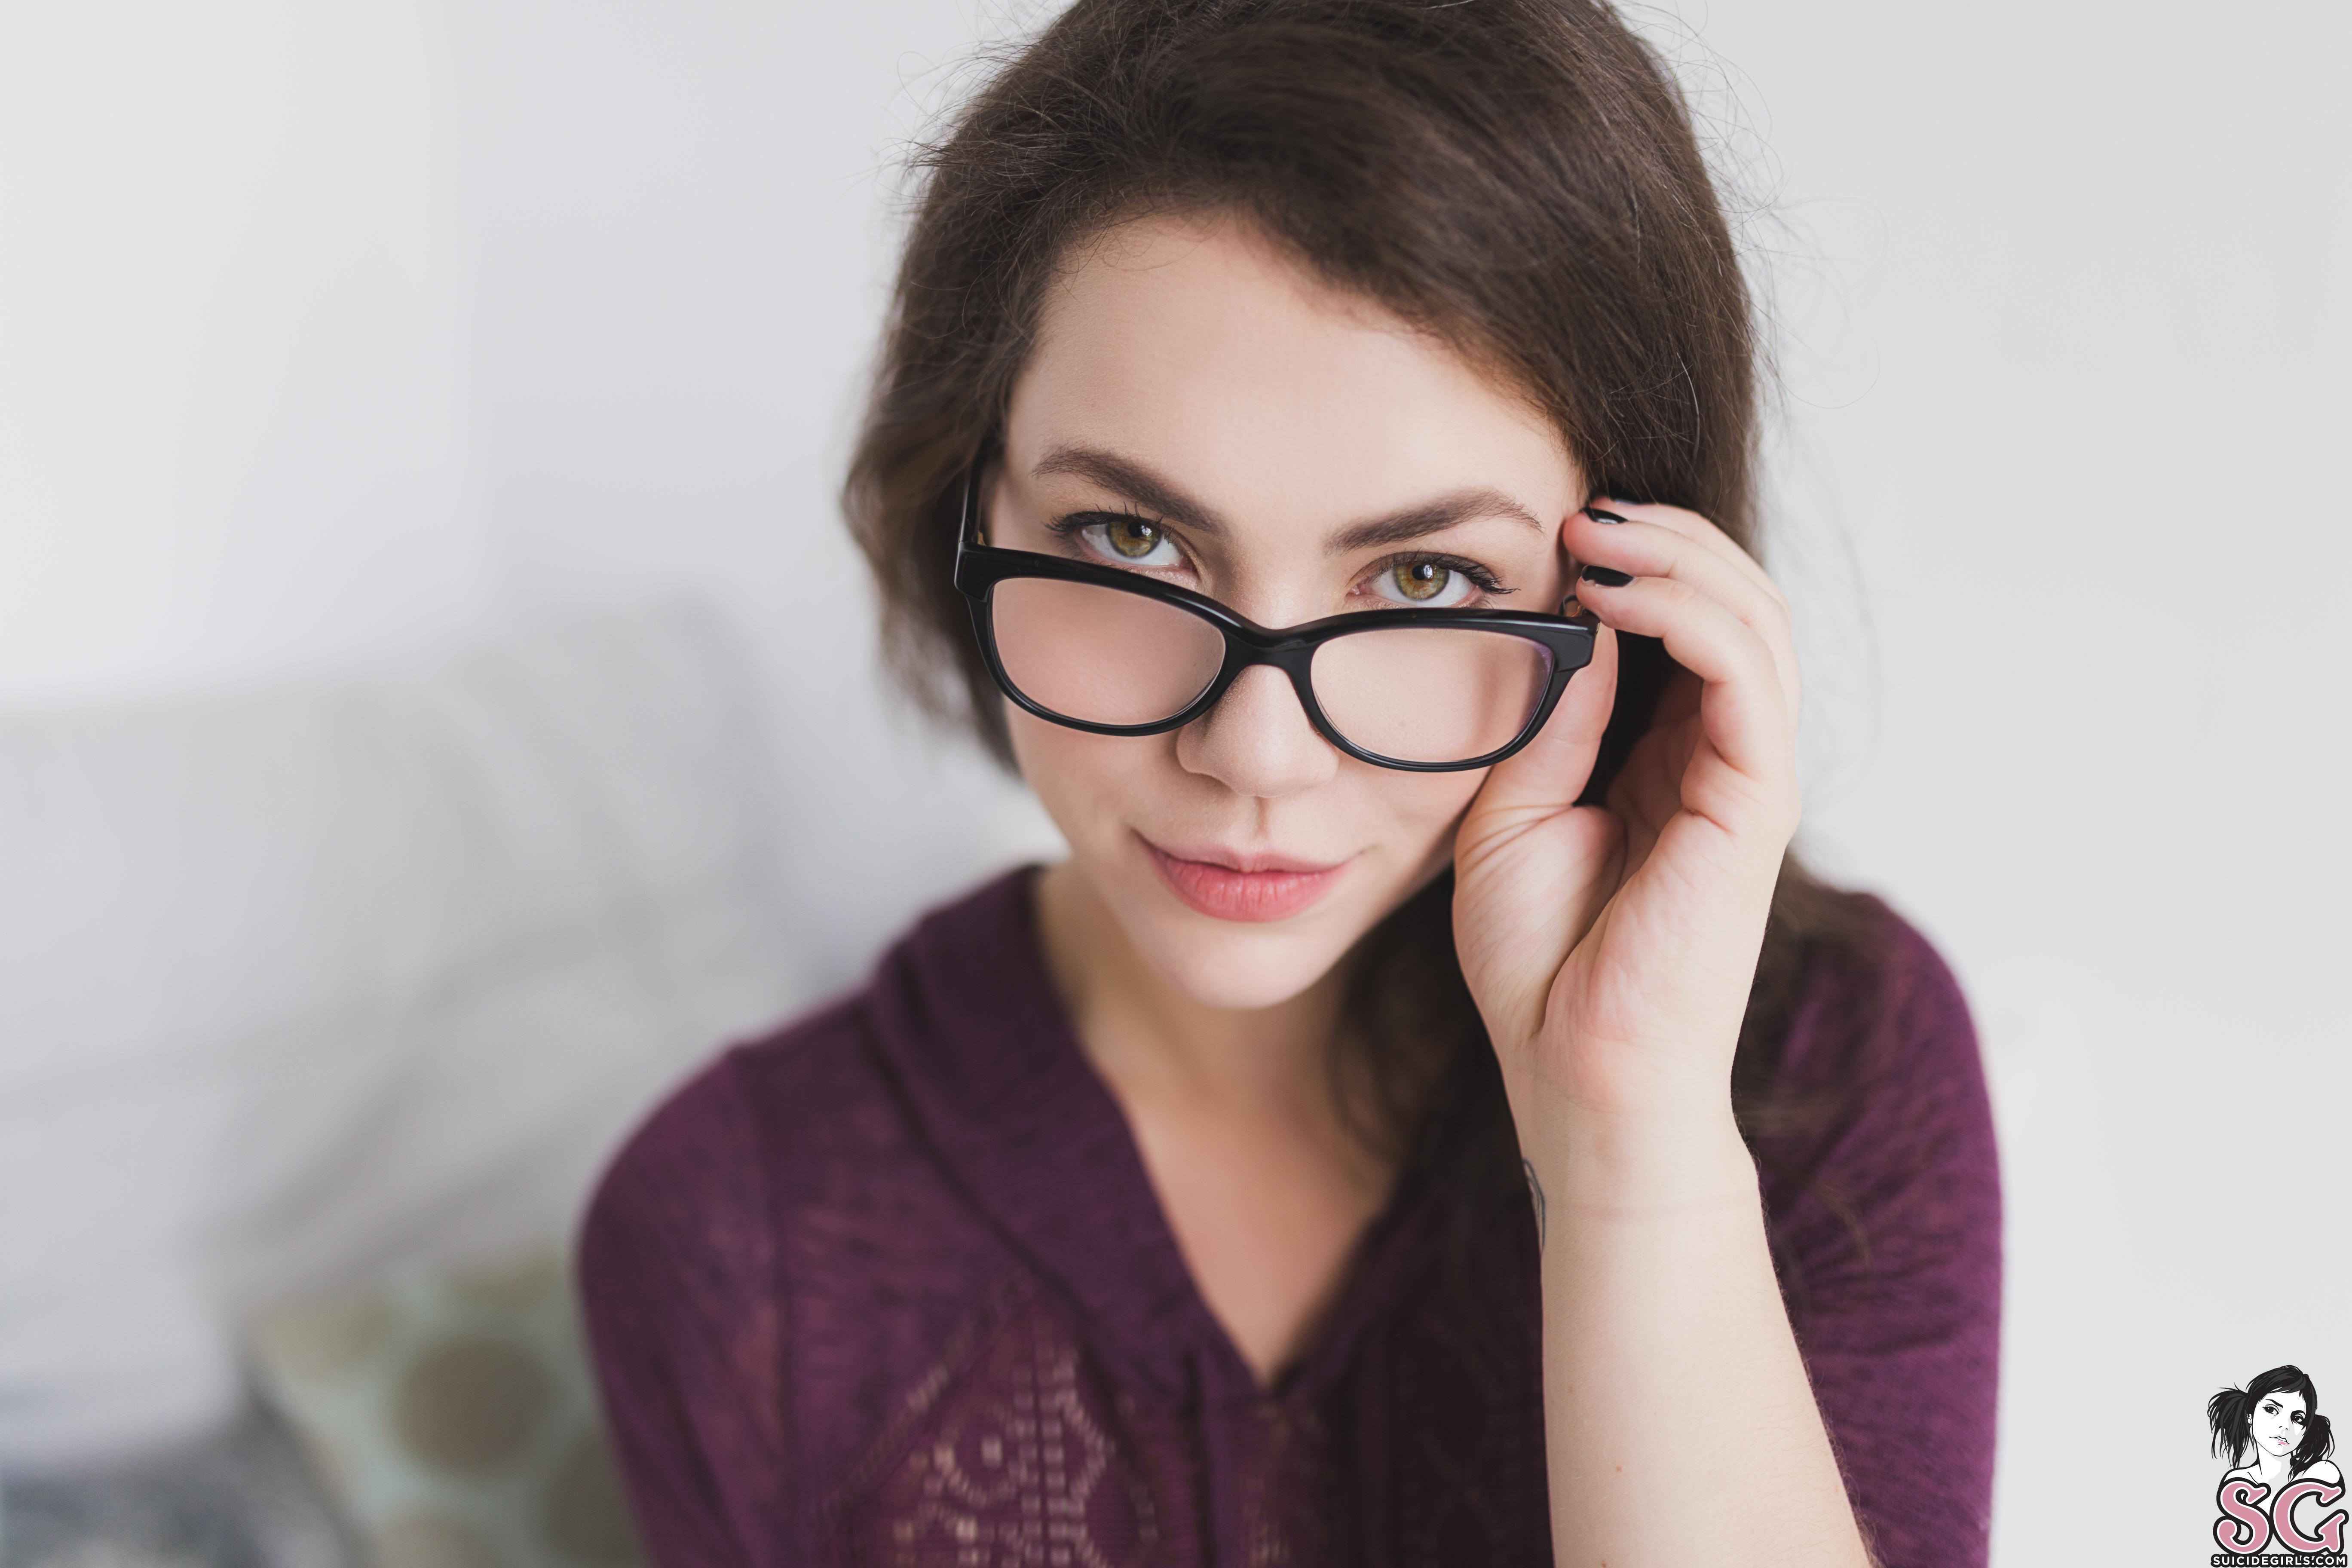 People 5472x3648 Milenci Suicide Girls model women with glasses looking at viewer women brunette portrait face smiling black nails depth of field indoors women indoors touching glasses closeup